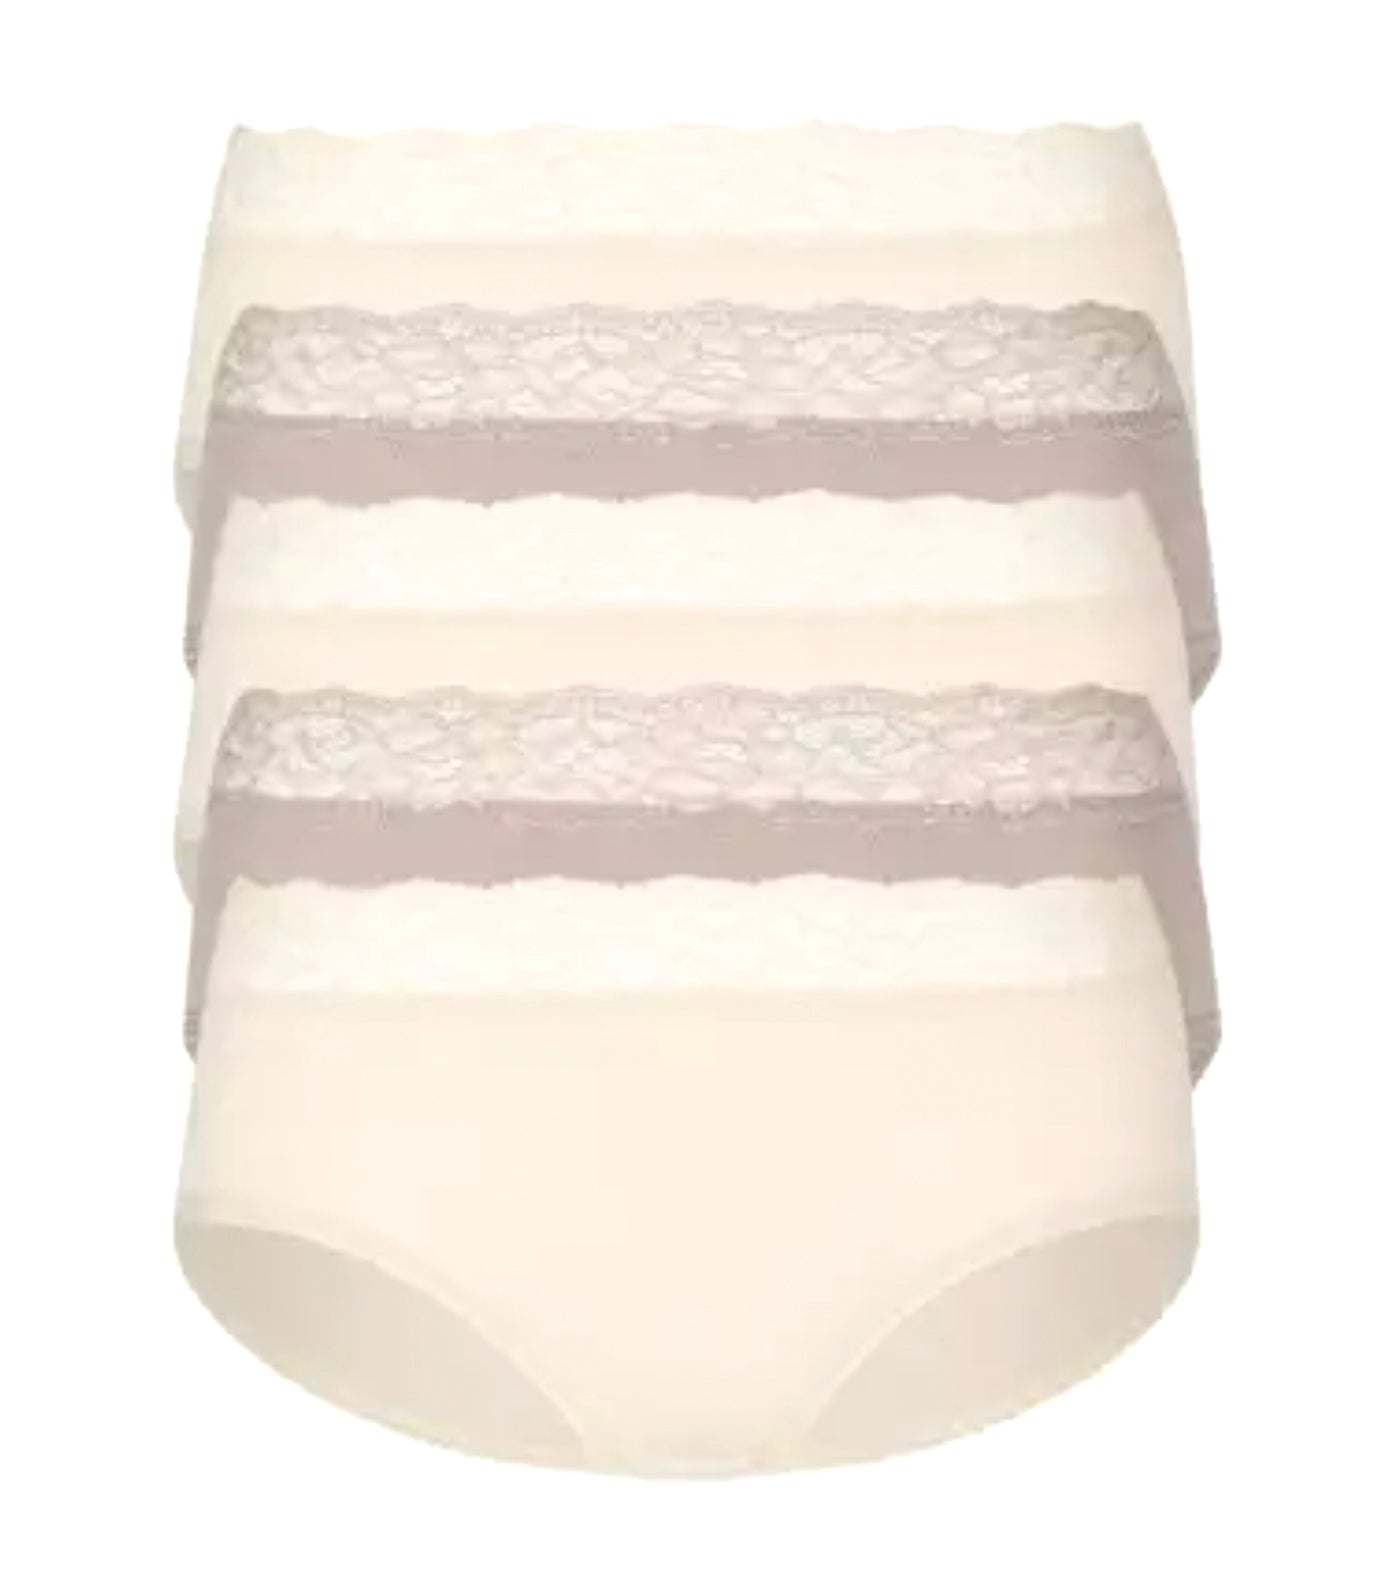 marks and spencer 5 pack lace waisted midi briefs - almond mix